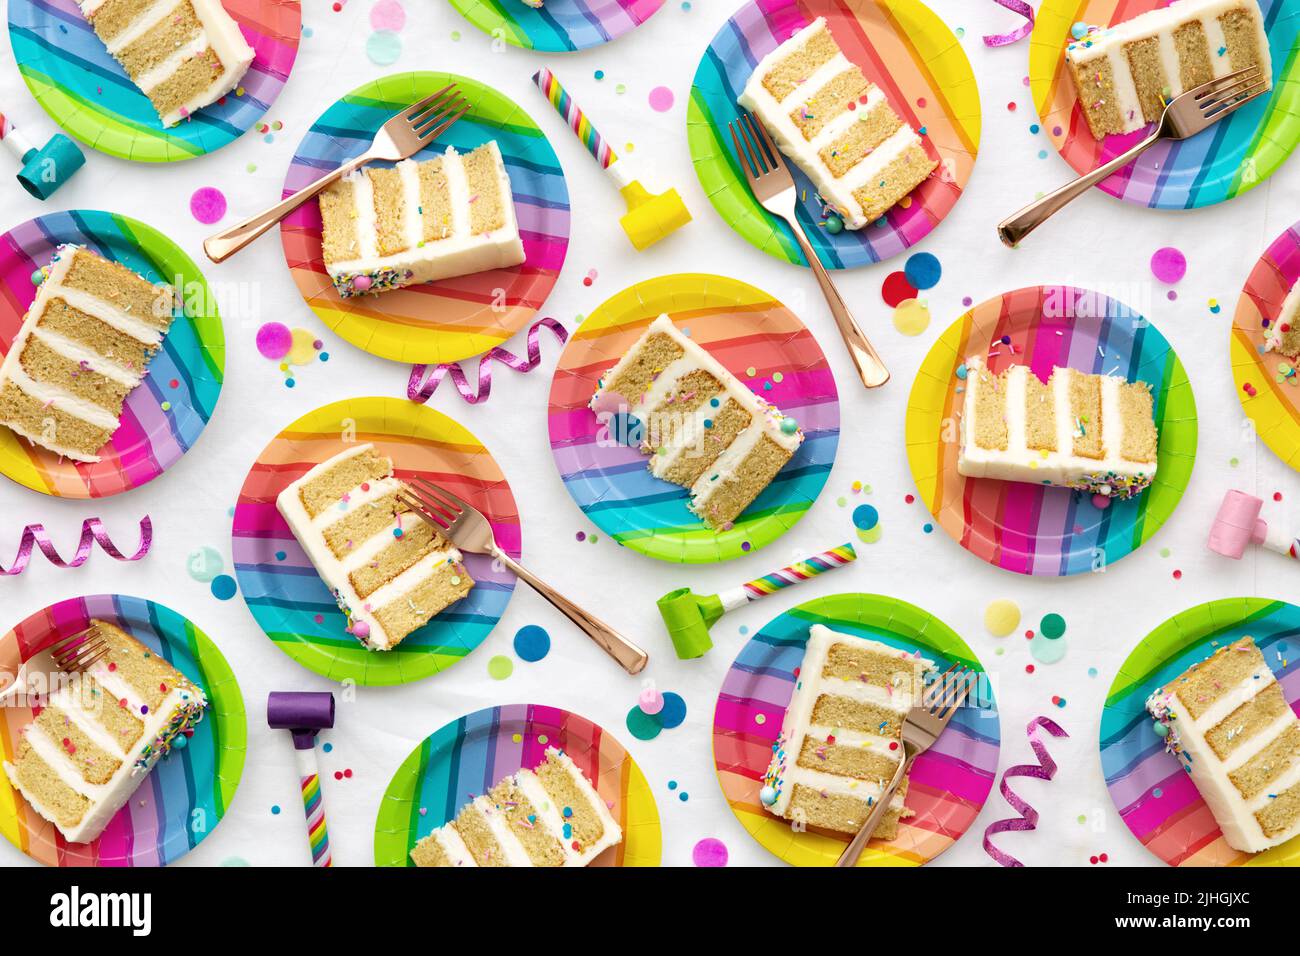 Colorful birthday party background of birthday cake slices on colorful rainbow plates at a birthday party Stock Photo